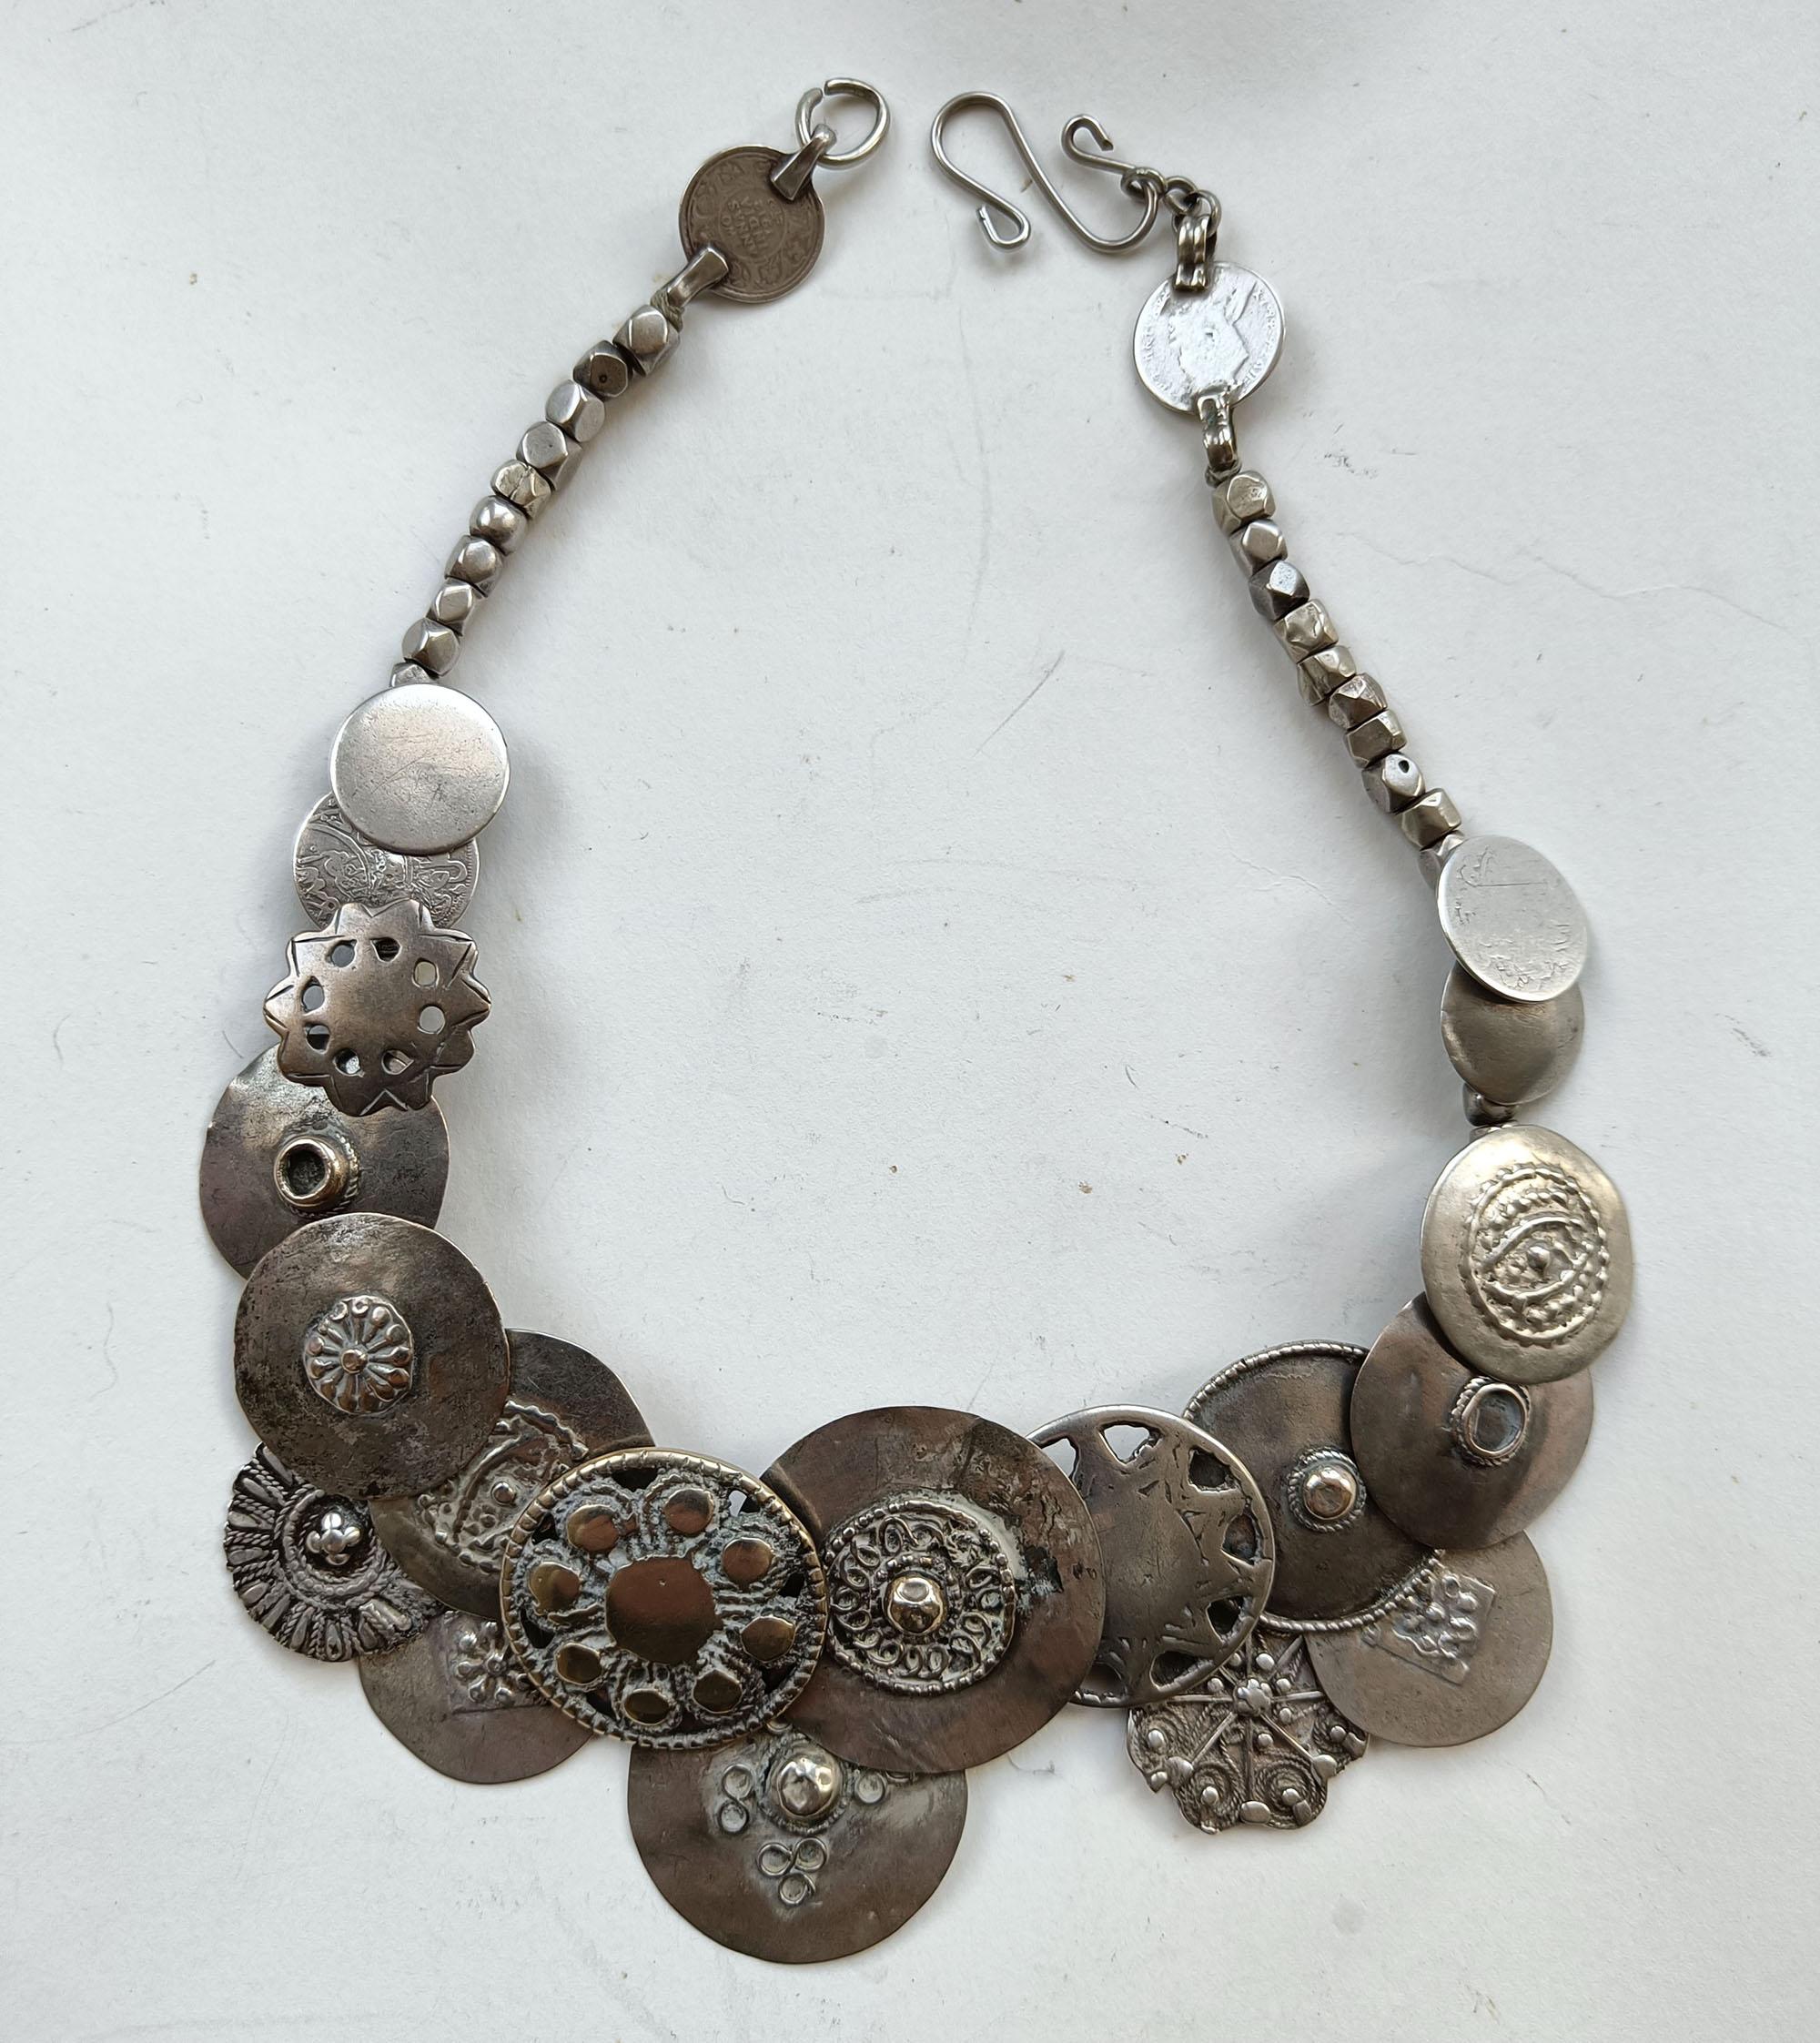  Indian Ethnographic Tribal silver Amulet necklace Rajasthan
Rare styled necklace made with a selection of shield type amulets the end with silver coins
Period early 20th century
Condition: Fine.
 